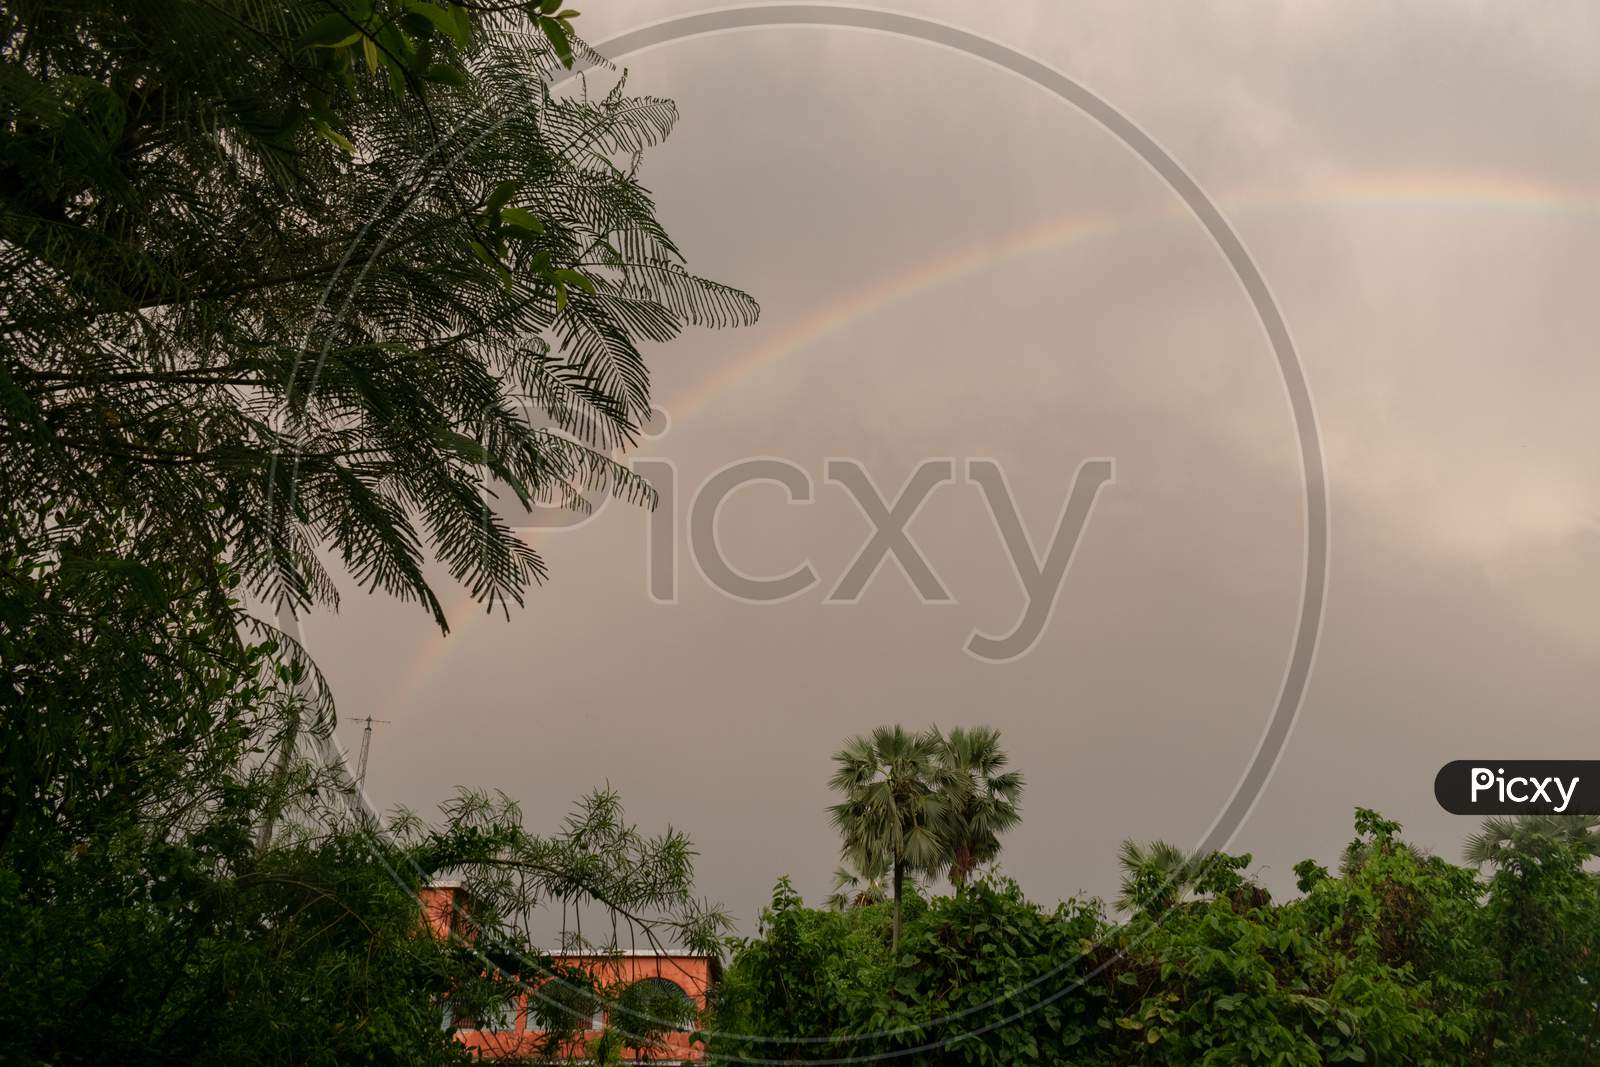 Picture Of A Rainy Day Where The Rainbow Has Spread Its Beauty In The Cloudy Sky In A Rural Environment